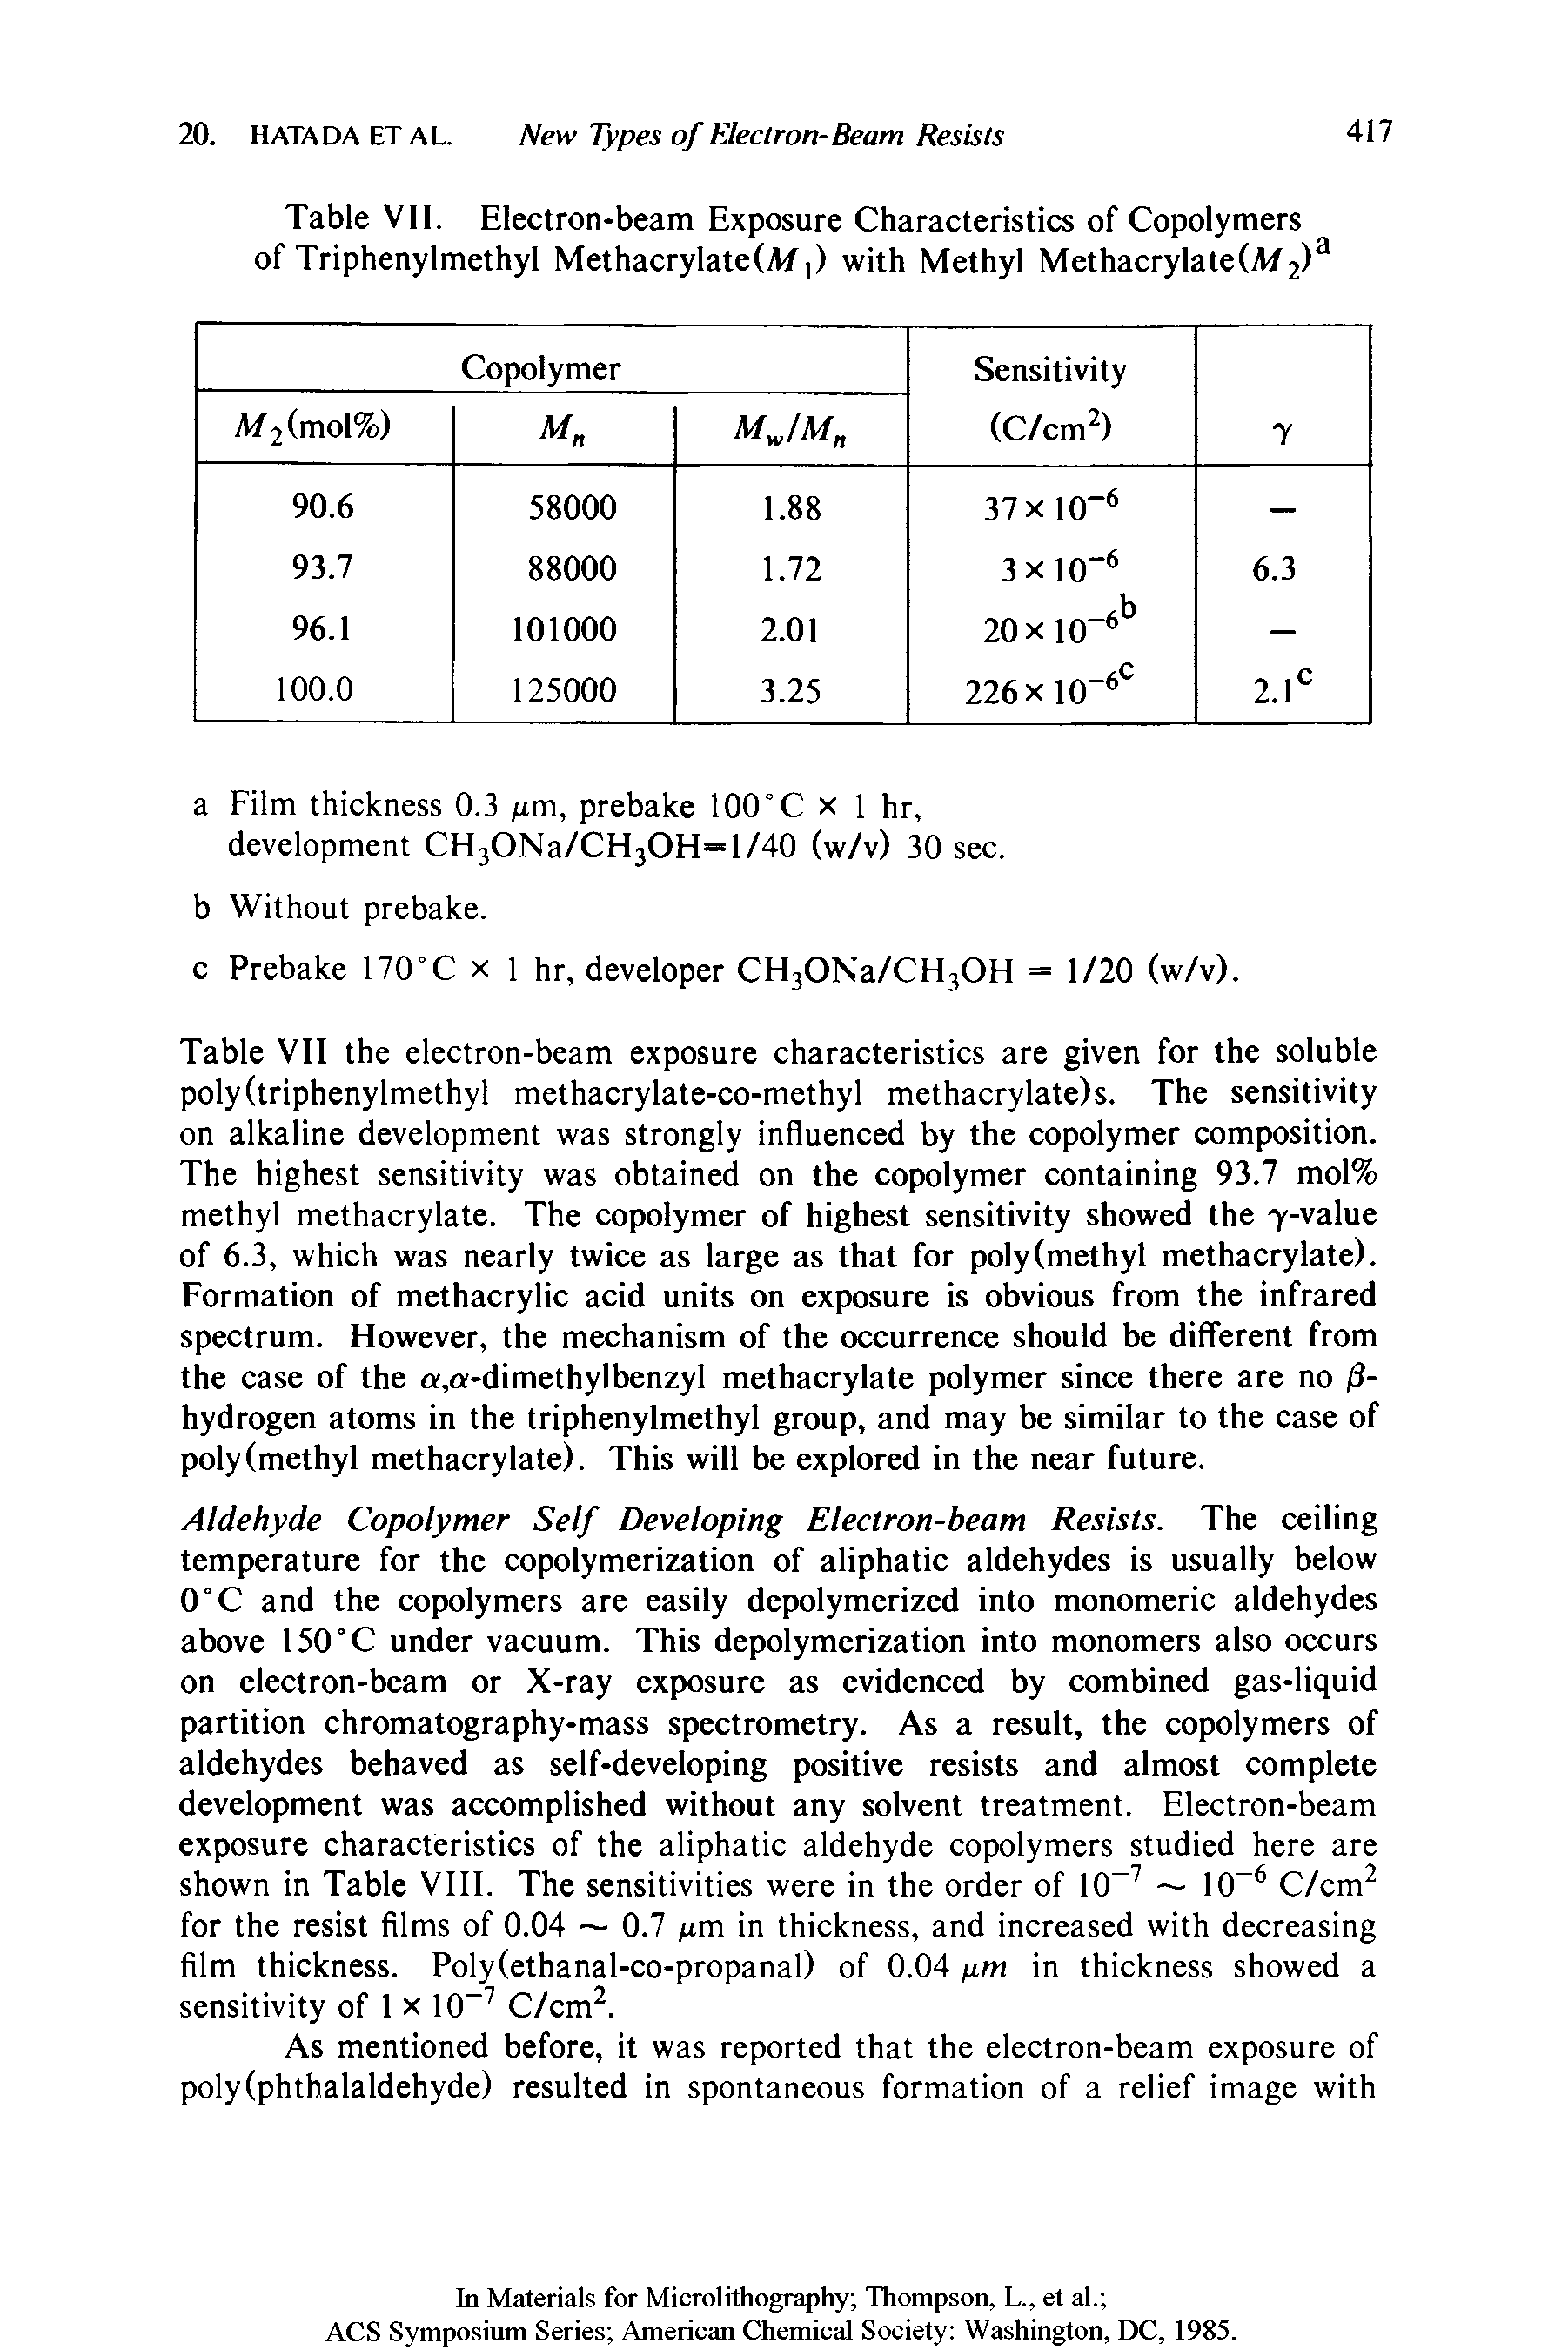 Table VII the electron-beam exposure characteristics are given for the soluble poly (triphenylmethyl methacrylate-co-methyl methacrylate)s. The sensitivity on alkaline development was strongly influenced by the copolymer composition. The highest sensitivity was obtained on the copolymer containing 93.7 mol% methyl methacrylate. The copolymer of highest sensitivity showed the 7-value of 6.3, which was nearly twice as large as that for poly(methyl methacrylate). Formation of methacrylic acid units on exposure is obvious from the infrared spectrum. However, the mechanism of the occurrence should be different from the case of the a,a-dimethylbenzyl methacrylate polymer since there are no /3-hydrogen atoms in the triphenylmethyl group, and may be similar to the case of poly (methyl methacrylate). This will be explored in the near future.